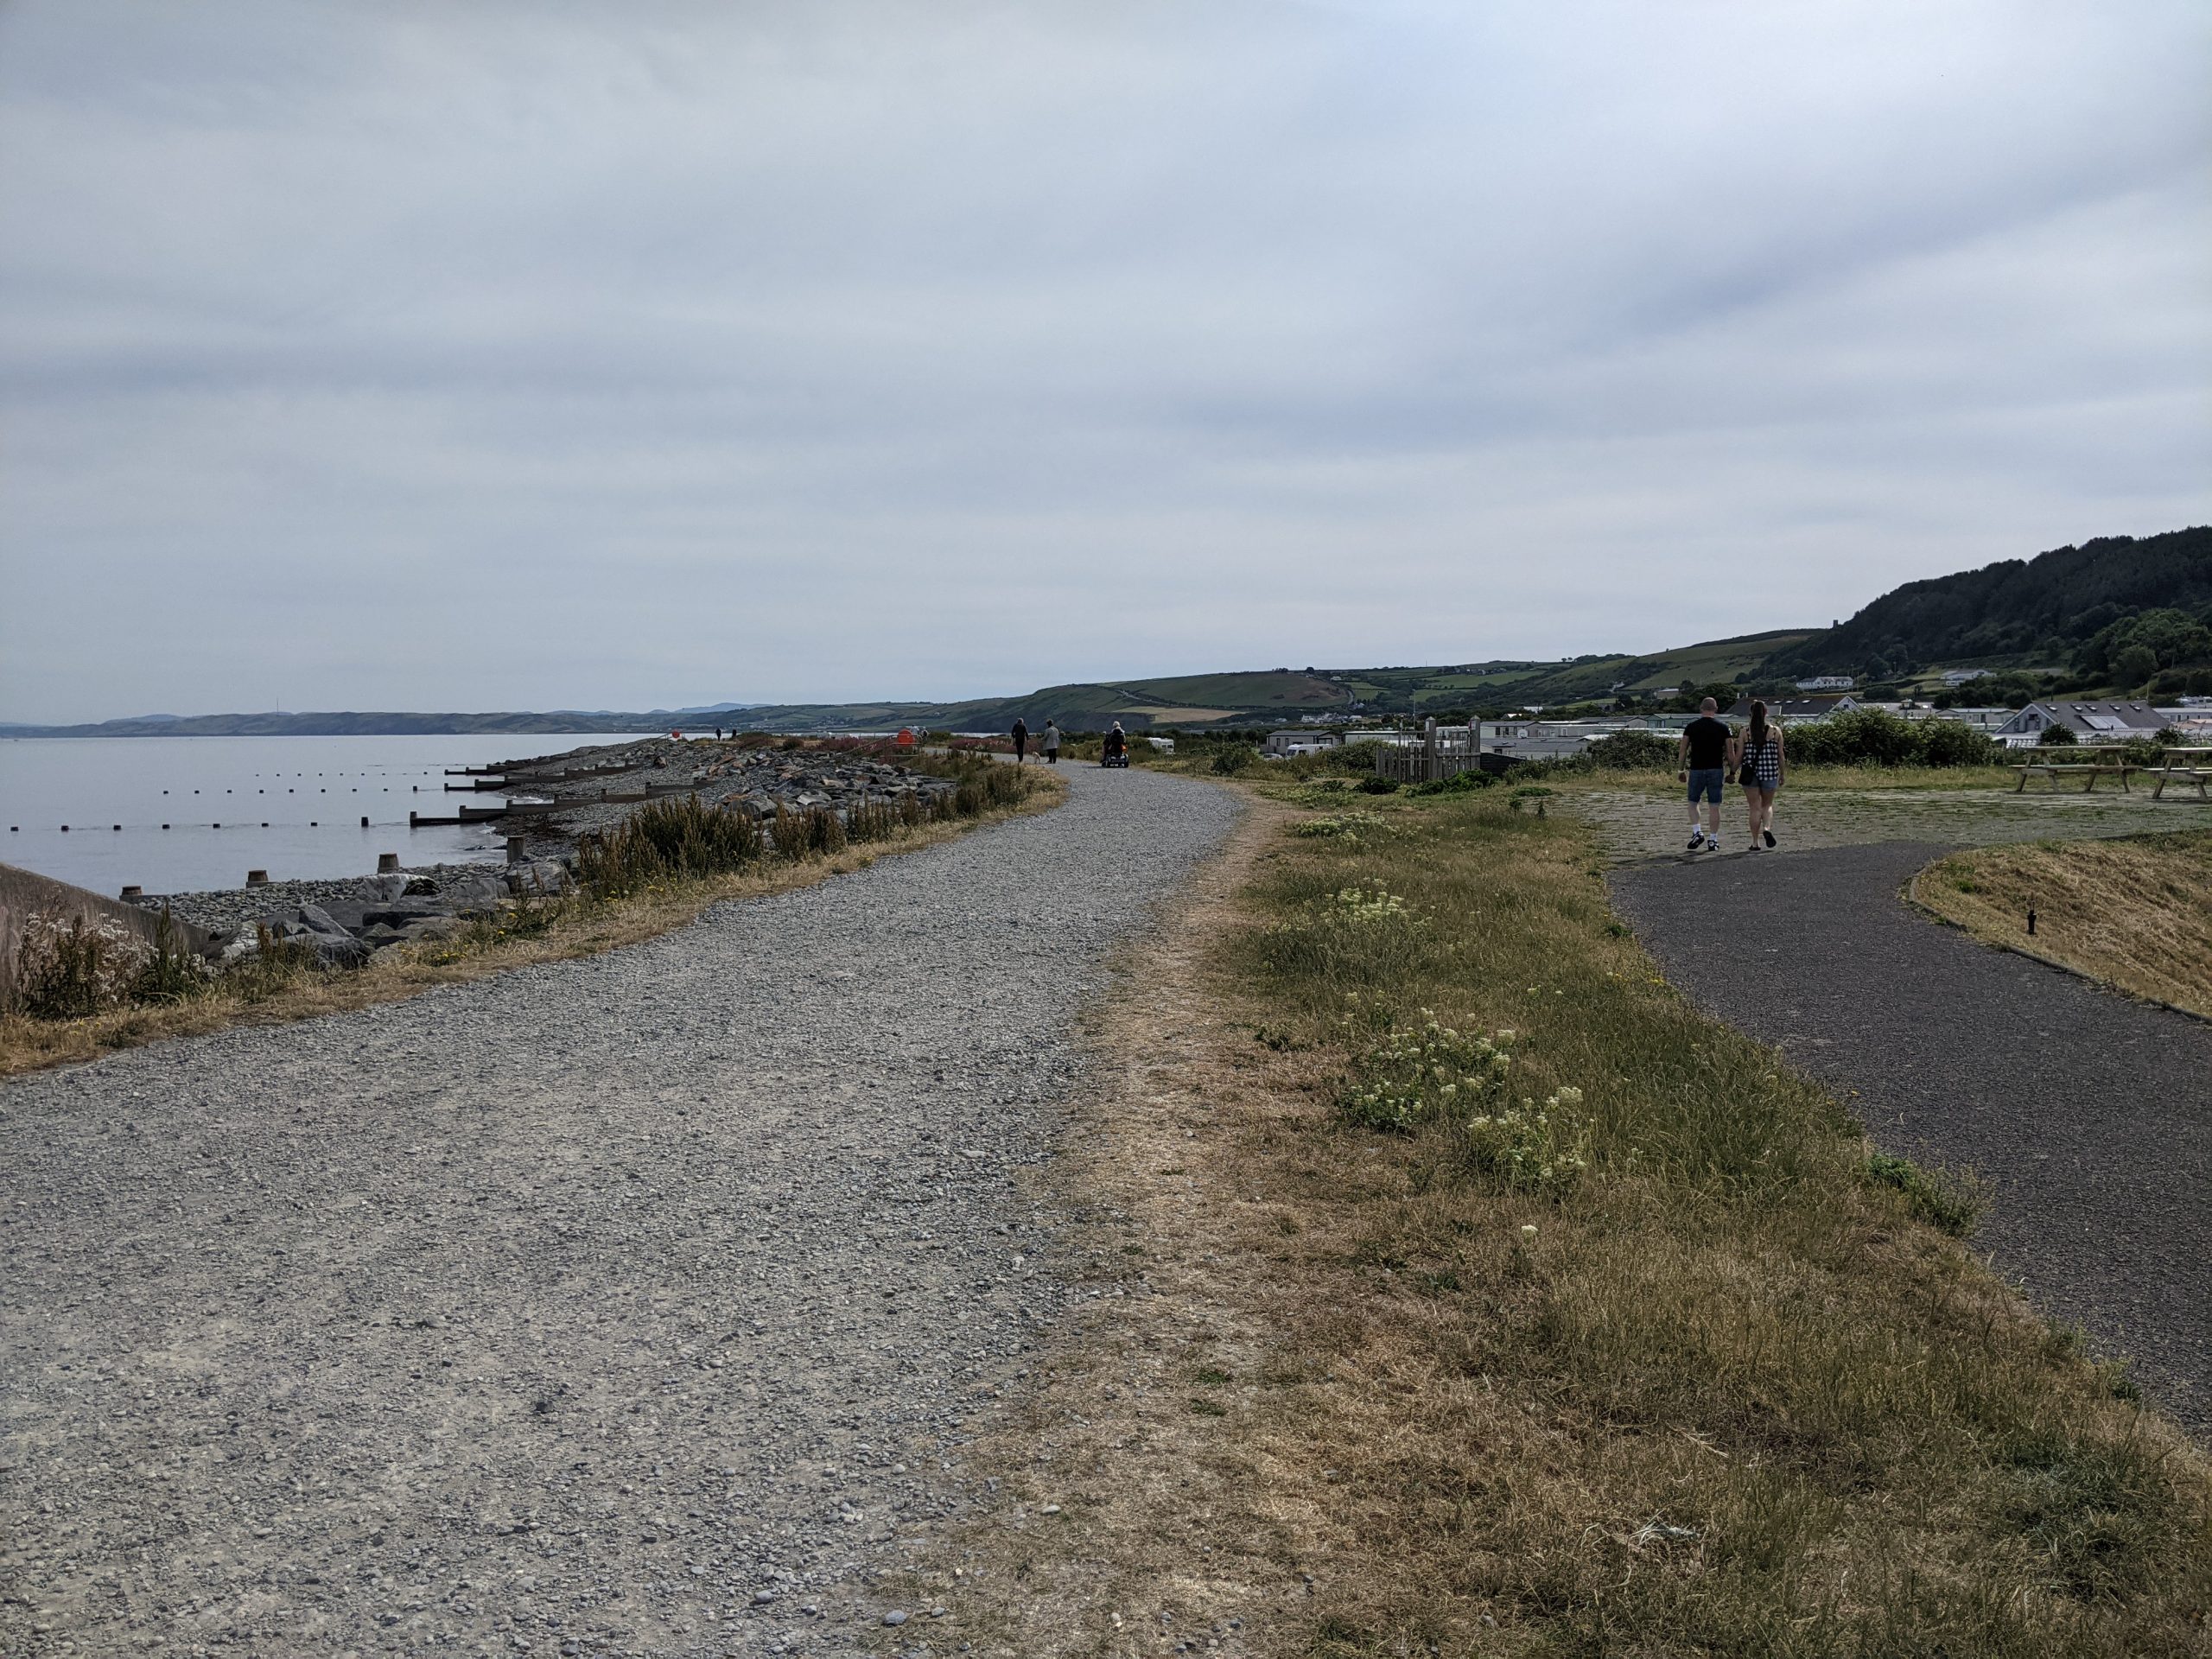 People walking along a seafront gravel path.